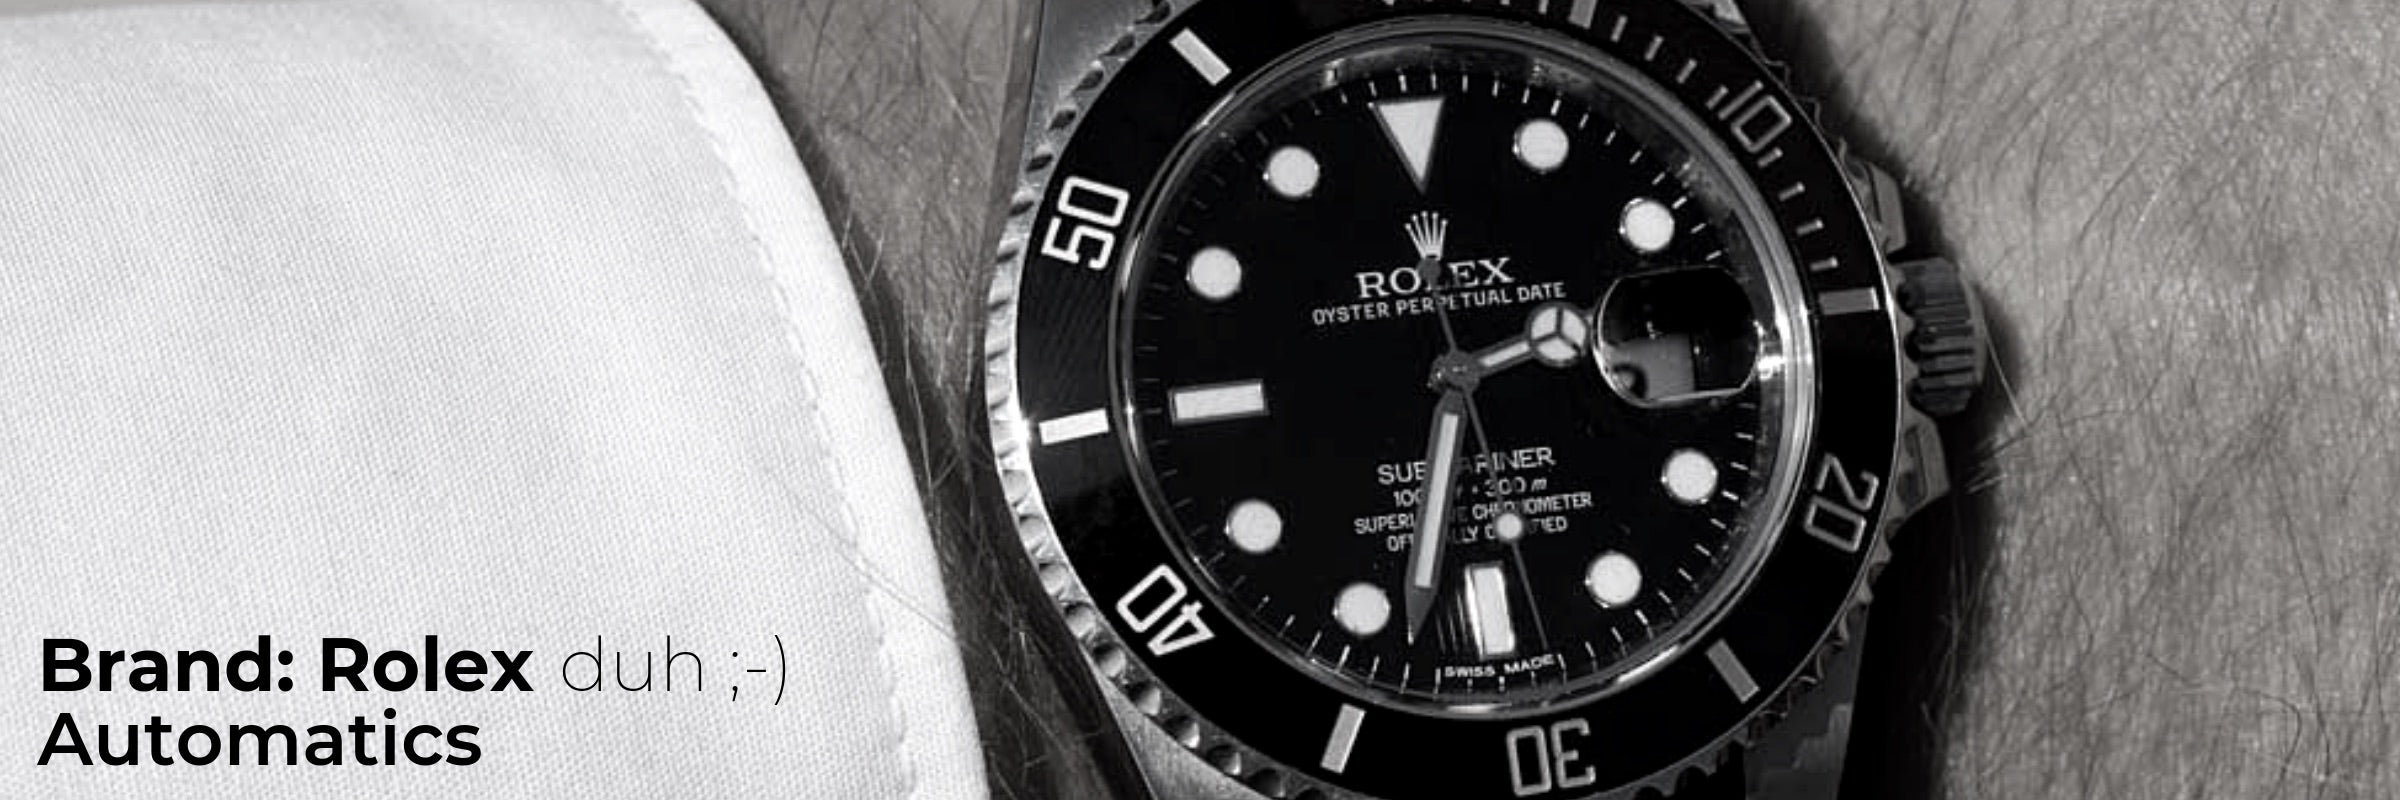 watch styles explained automatic rolex wikipedia